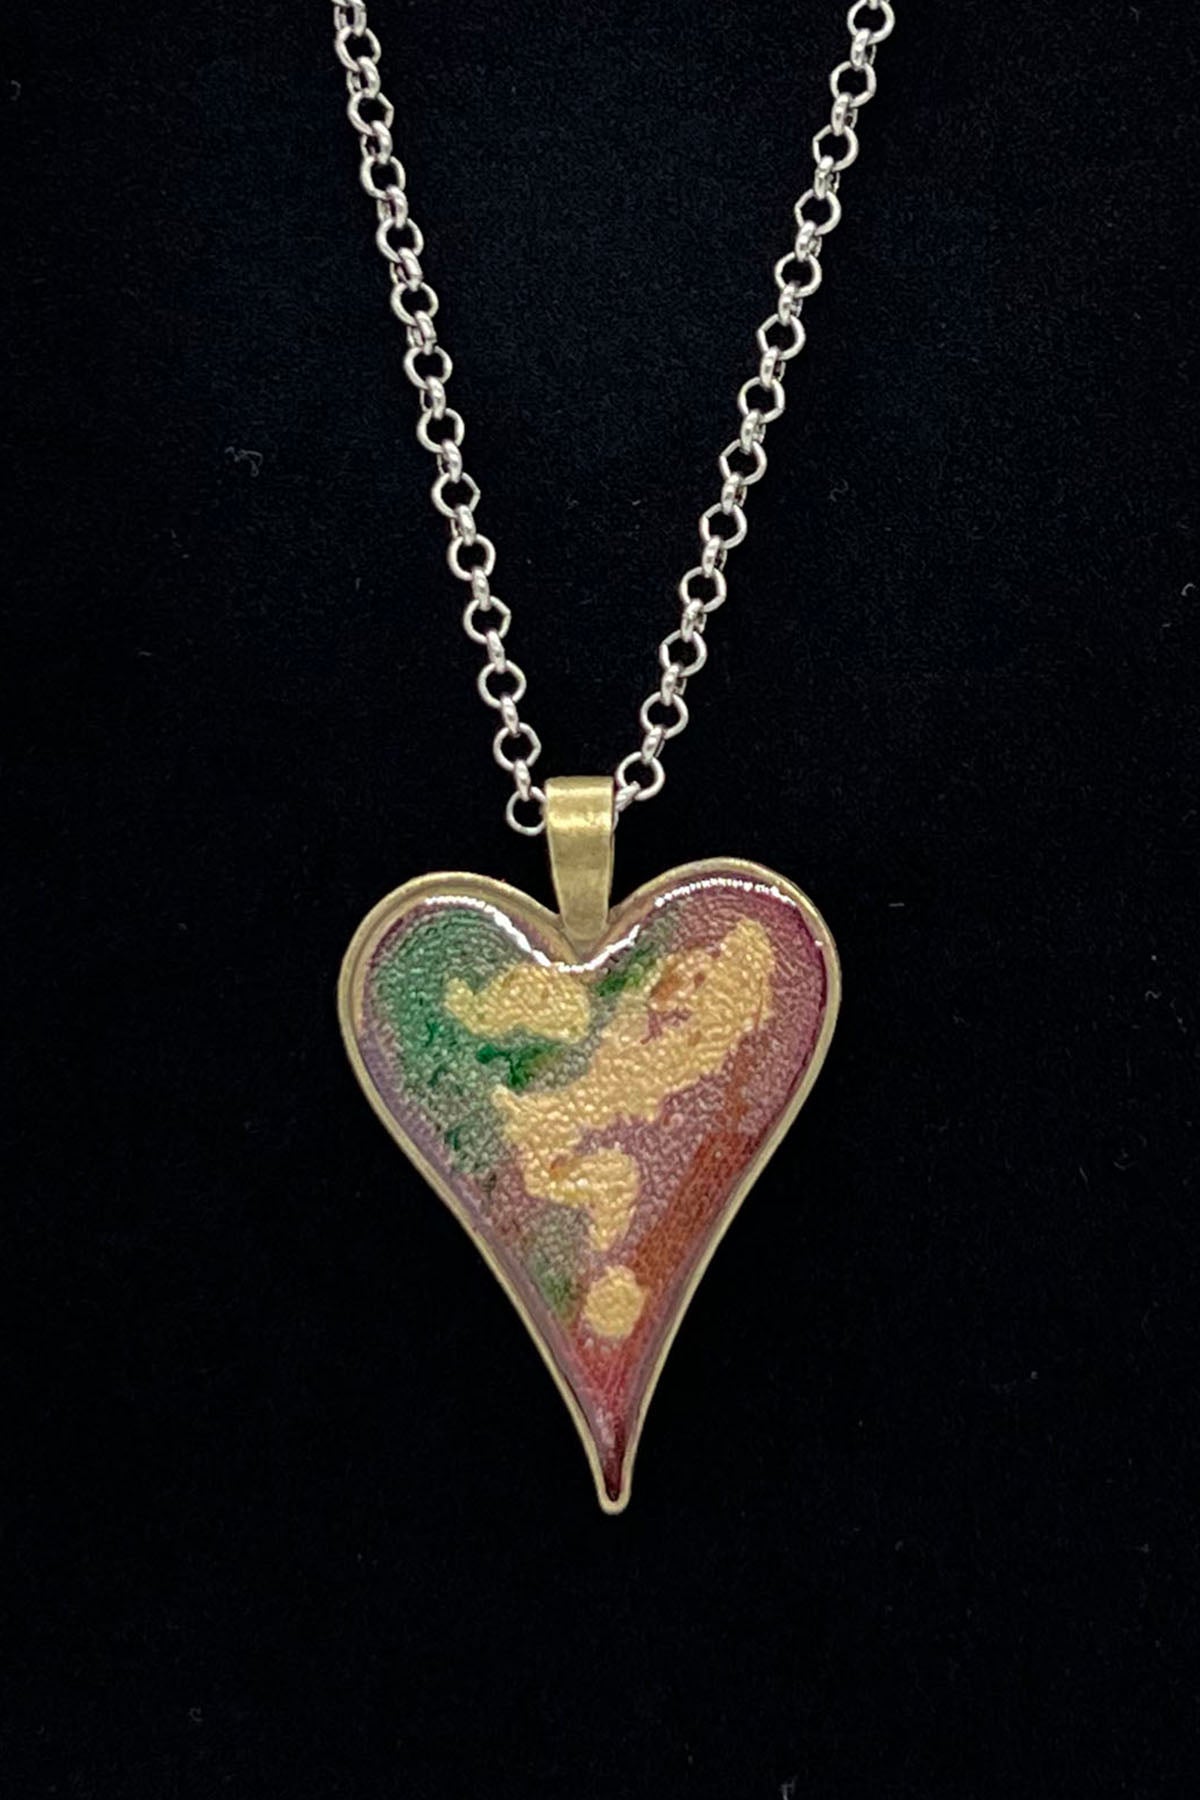 Heart Pendant Necklace (bronze) with gold, red, green Original Jewelry Art